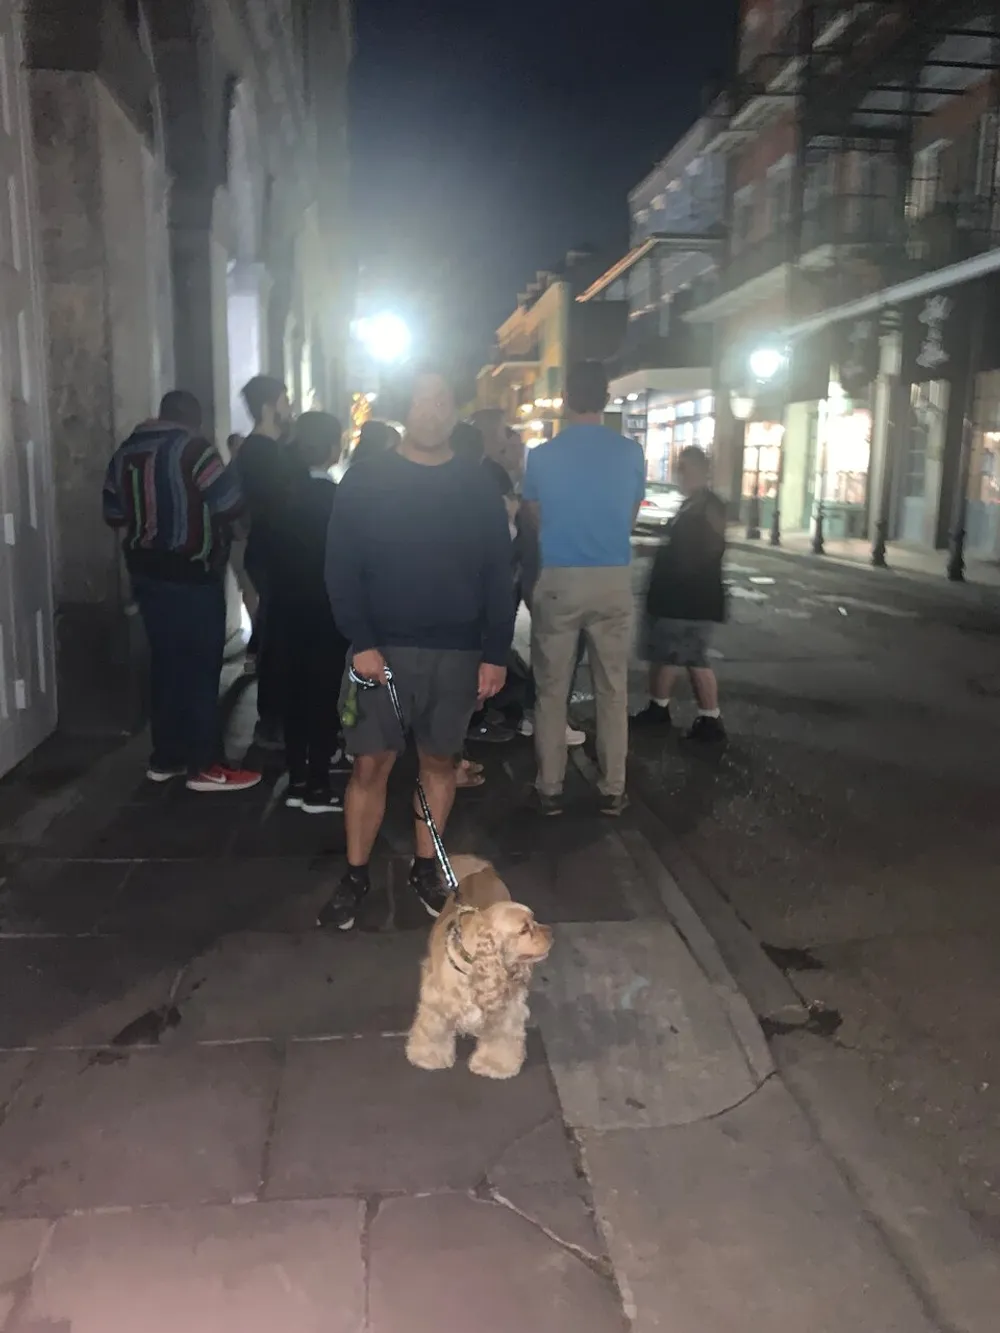 A person stands with a leashed cat on a city sidewalk at night while others gather in the background